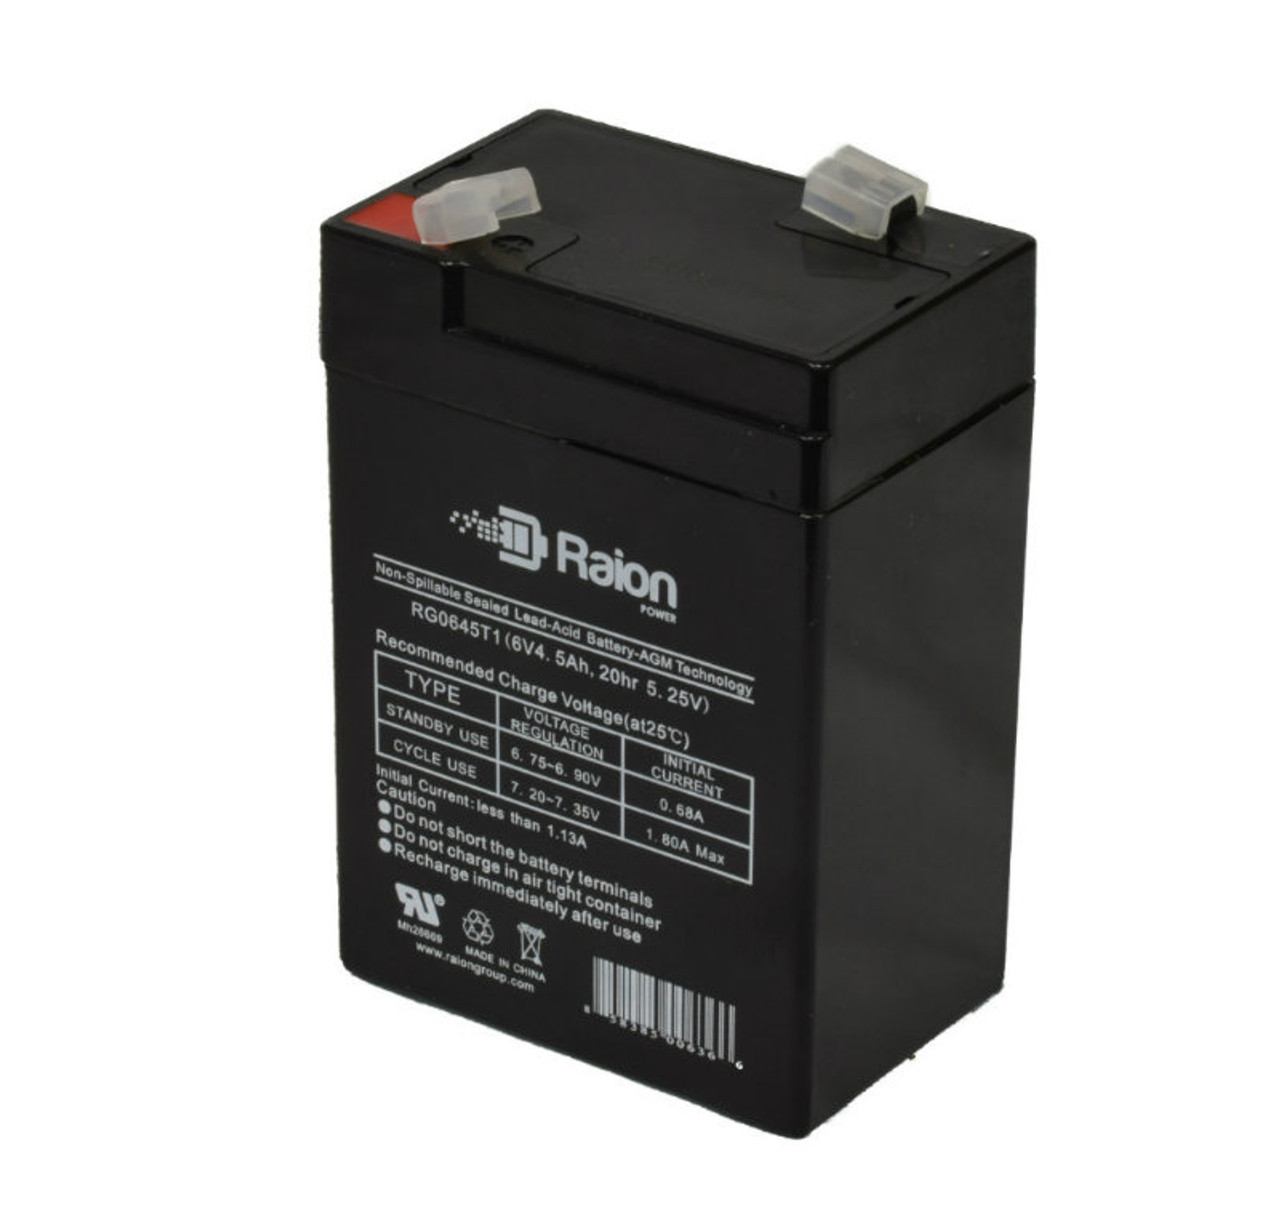 Raion Power RG0645T1 6V 4.5Ah Replacement Battery Cartridge for Bci International 7000 Oximeter